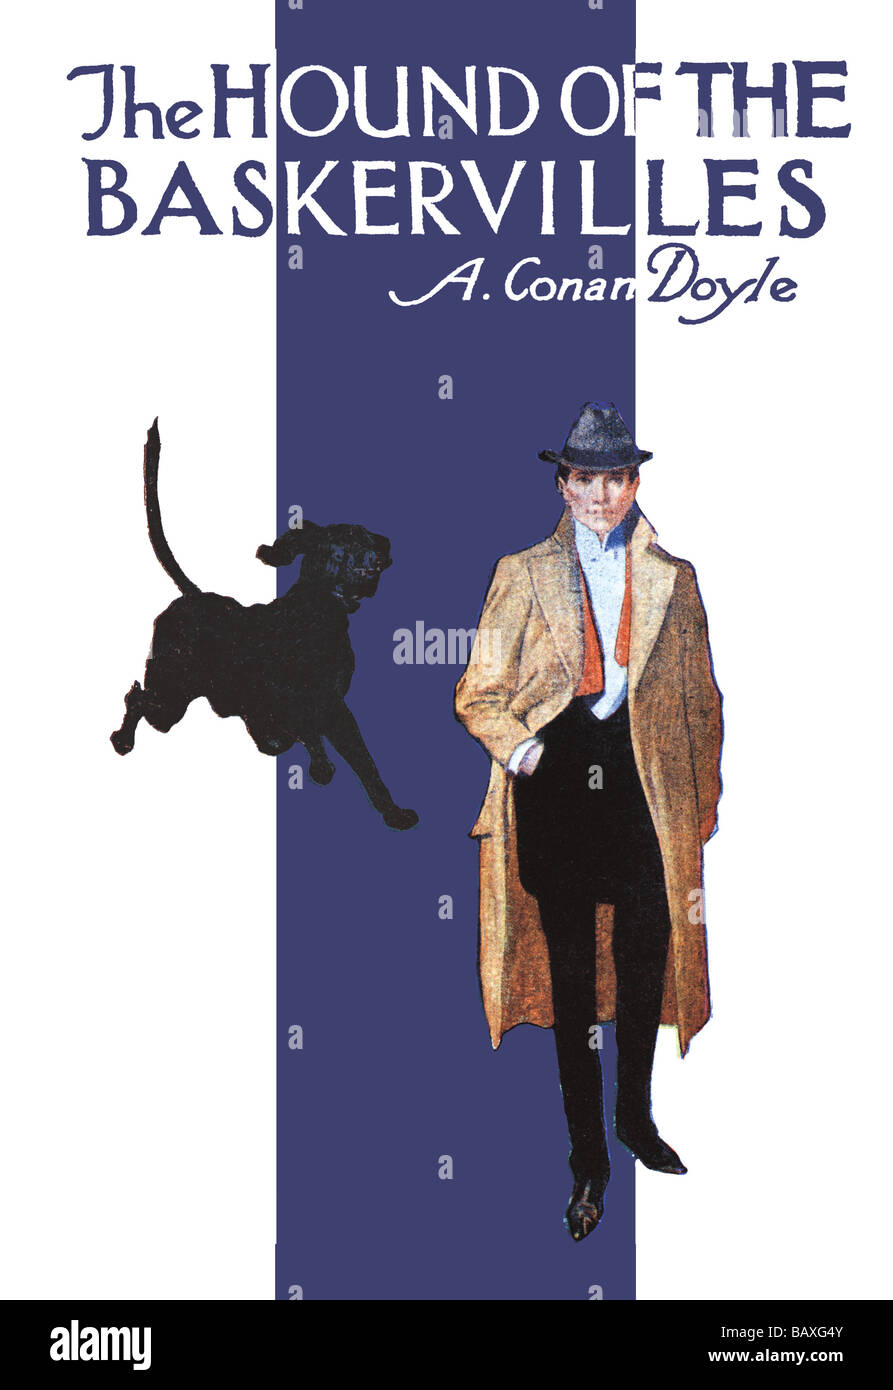 The Hound of the Baskervilles #2 (book cover) Stock Photo